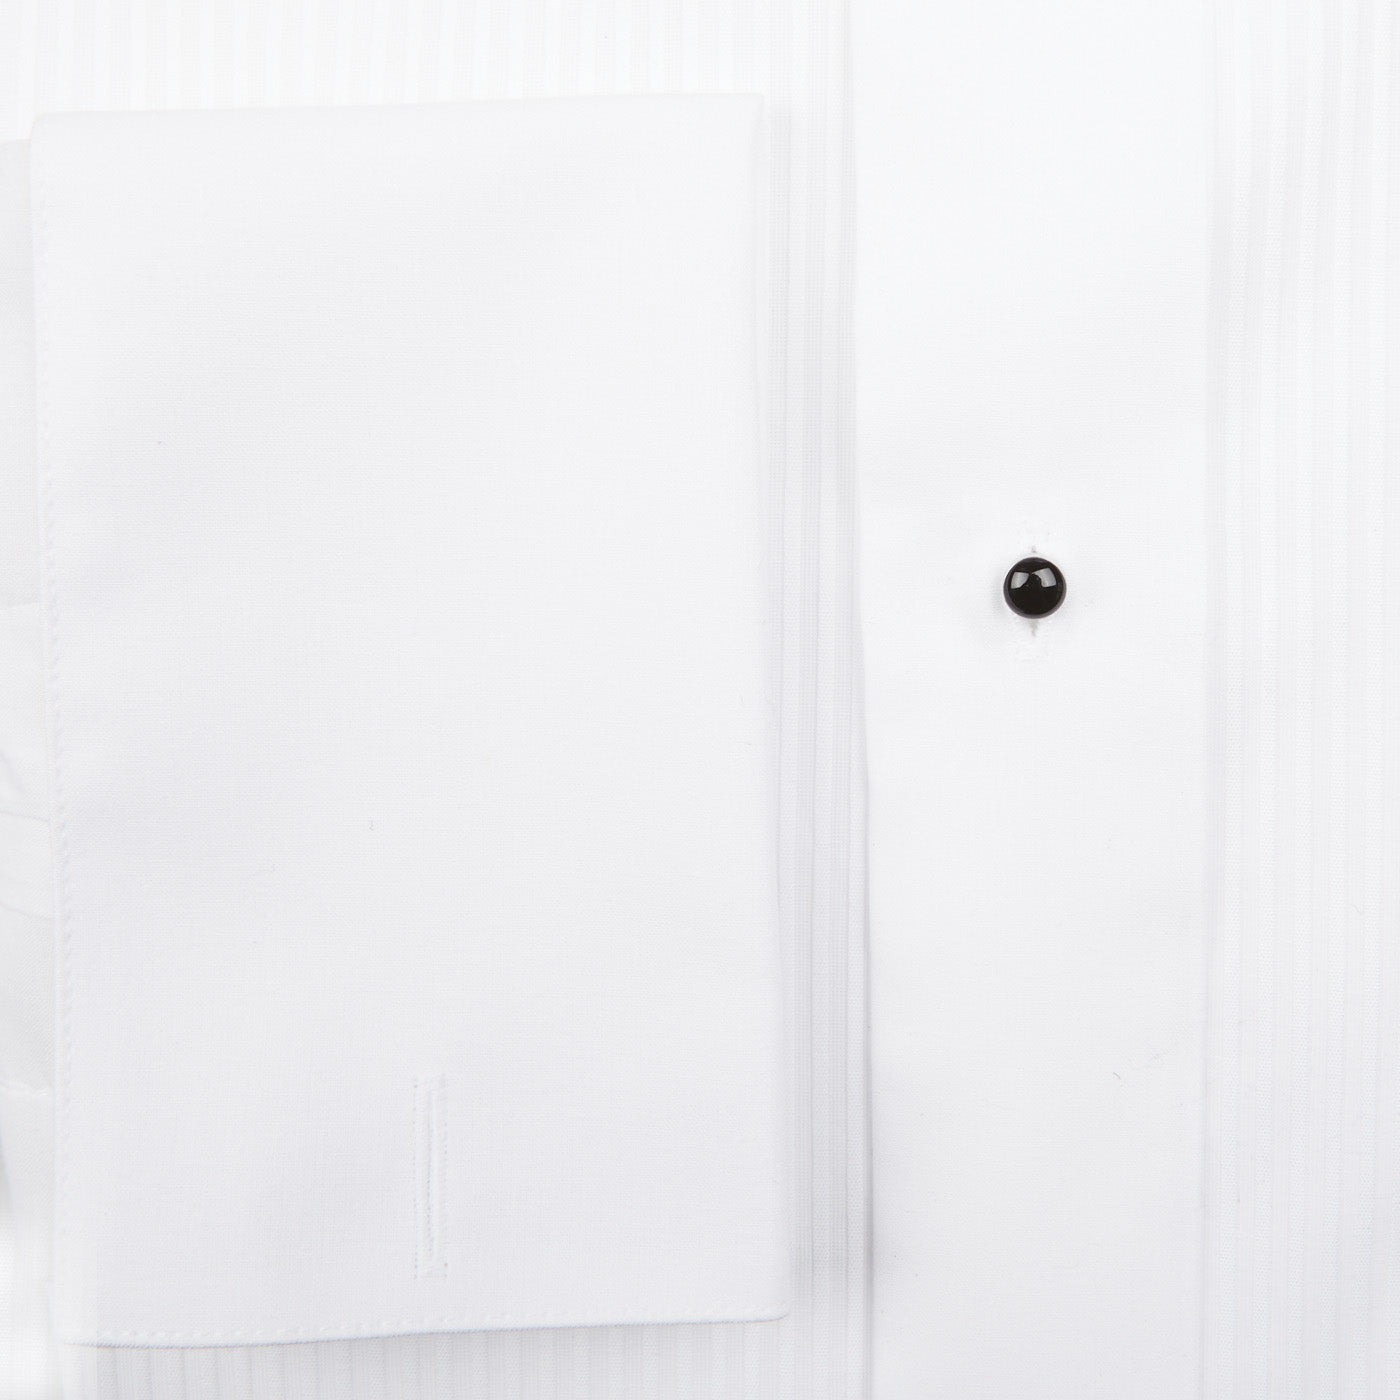 A Canali White Cotton Double Cuff Pleated Dress Shirt with a pocket and cufflinks.